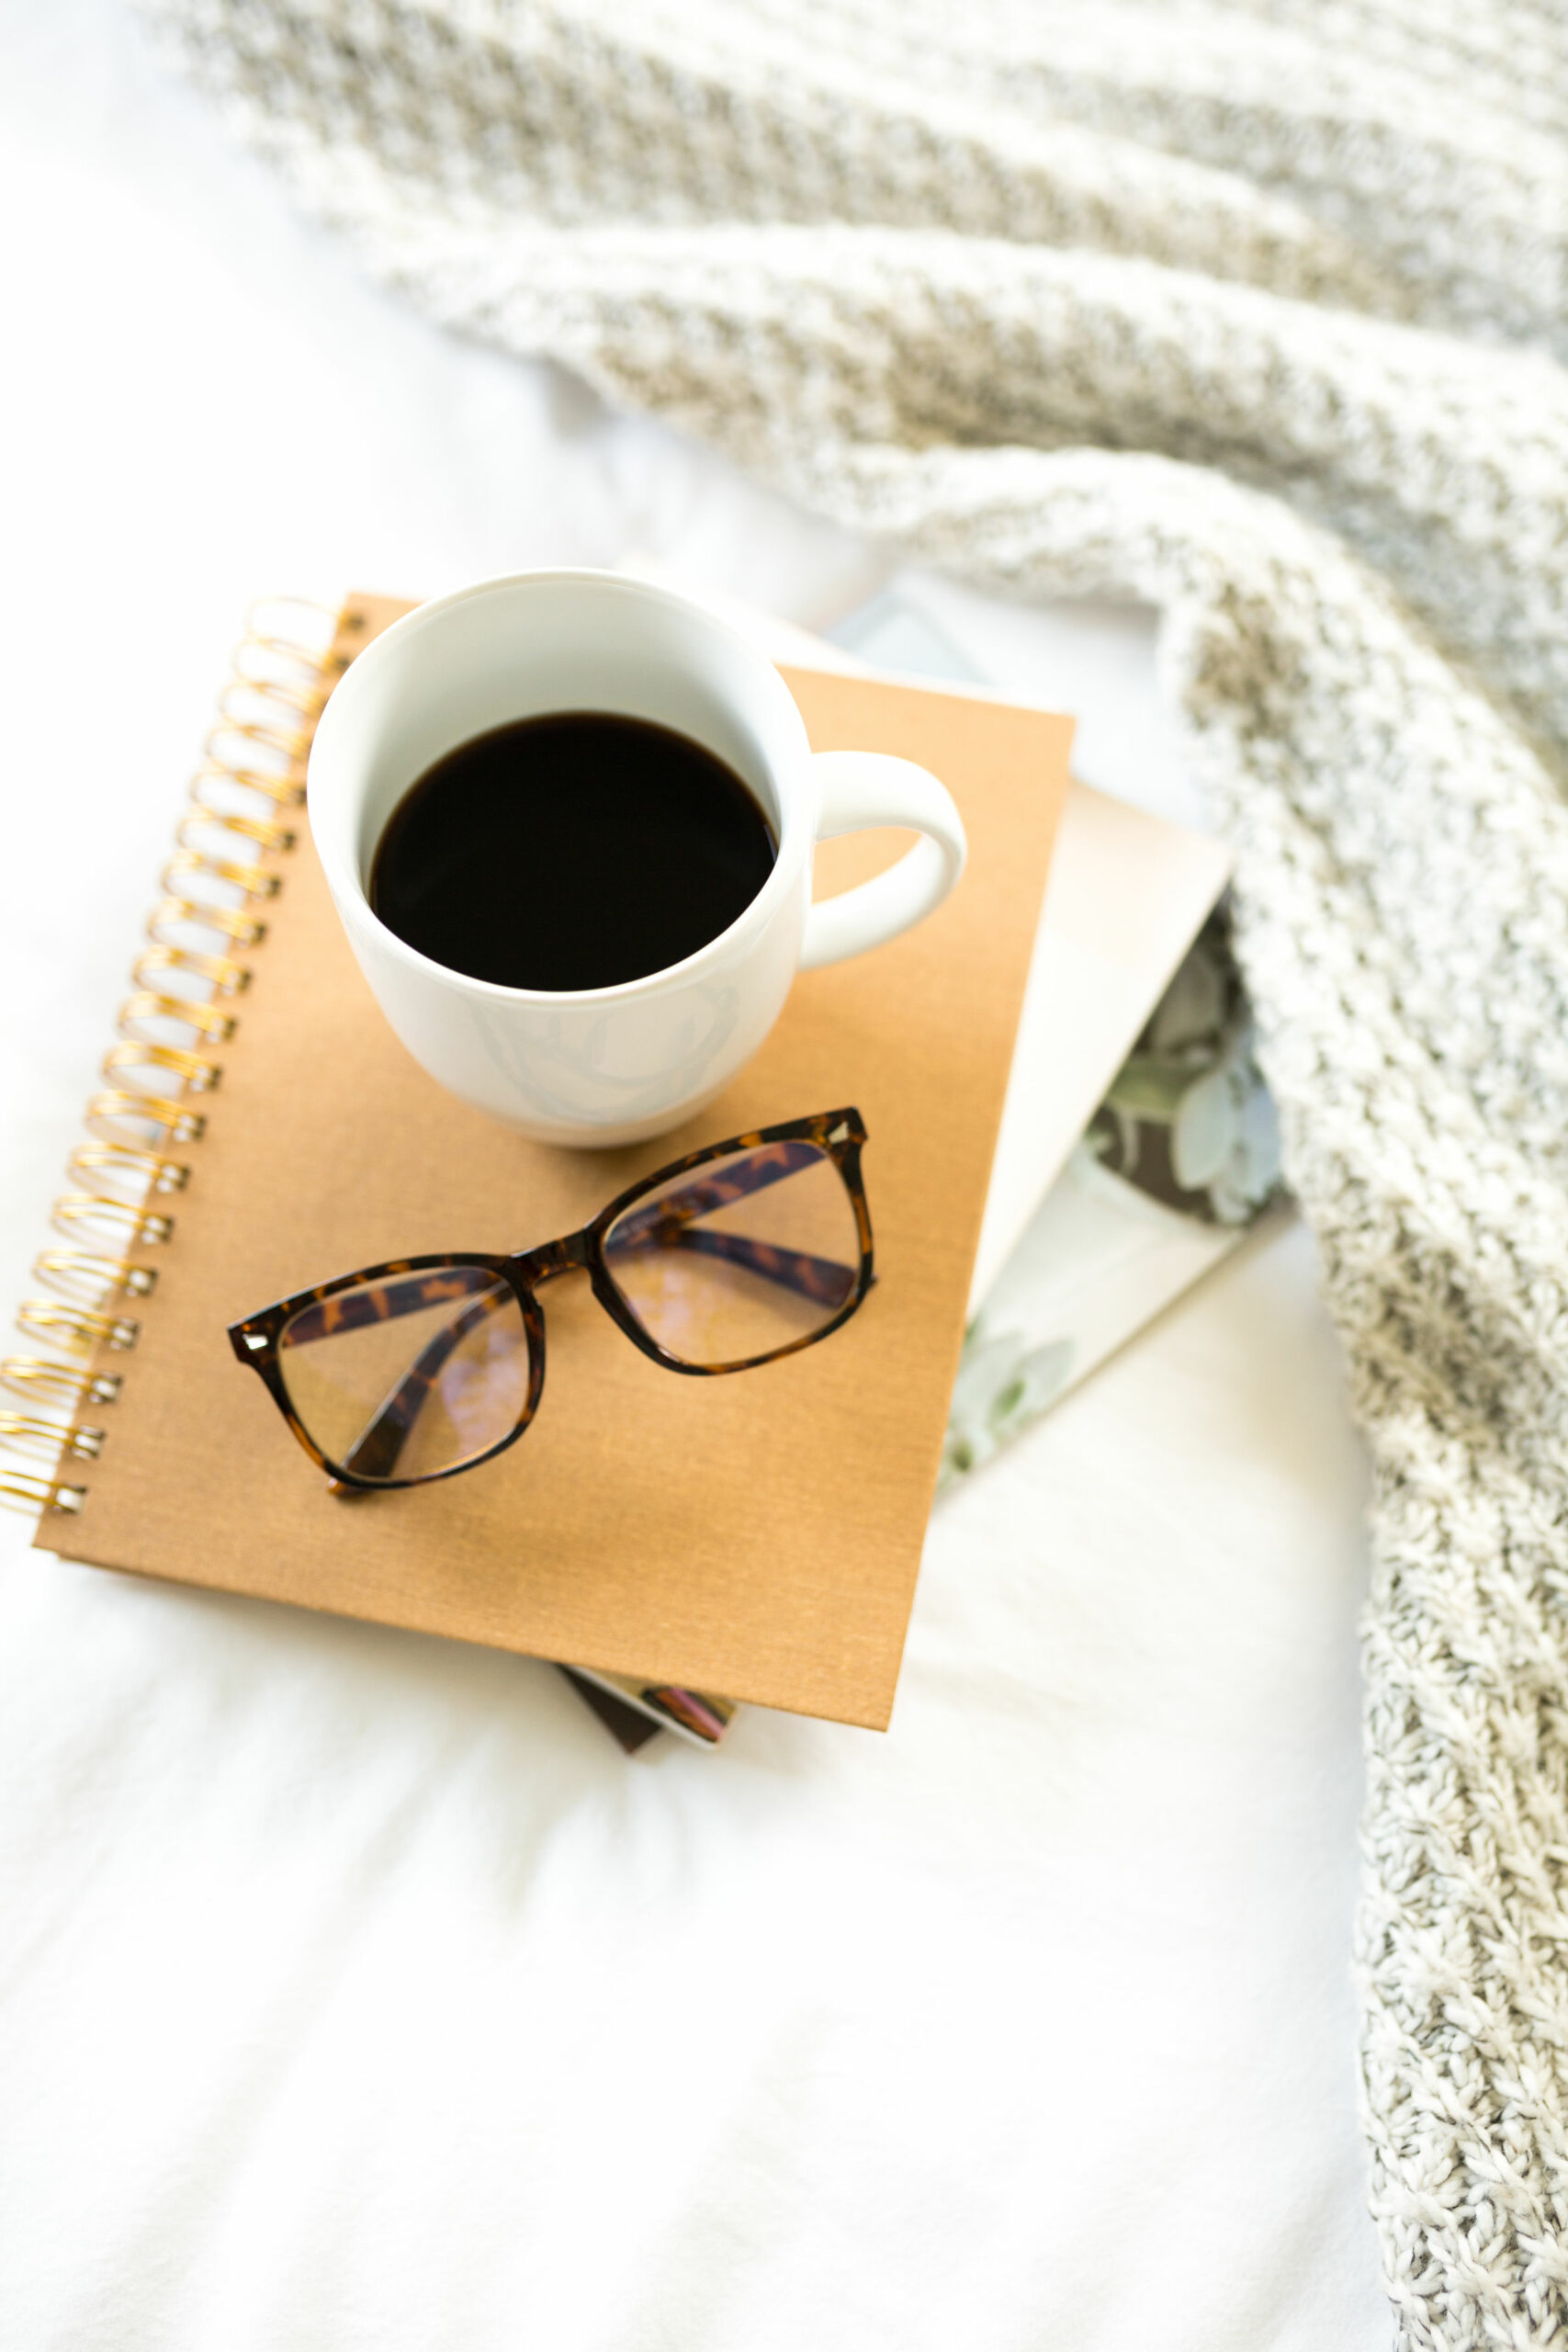 Cup of coffee, reading glasses and notebook